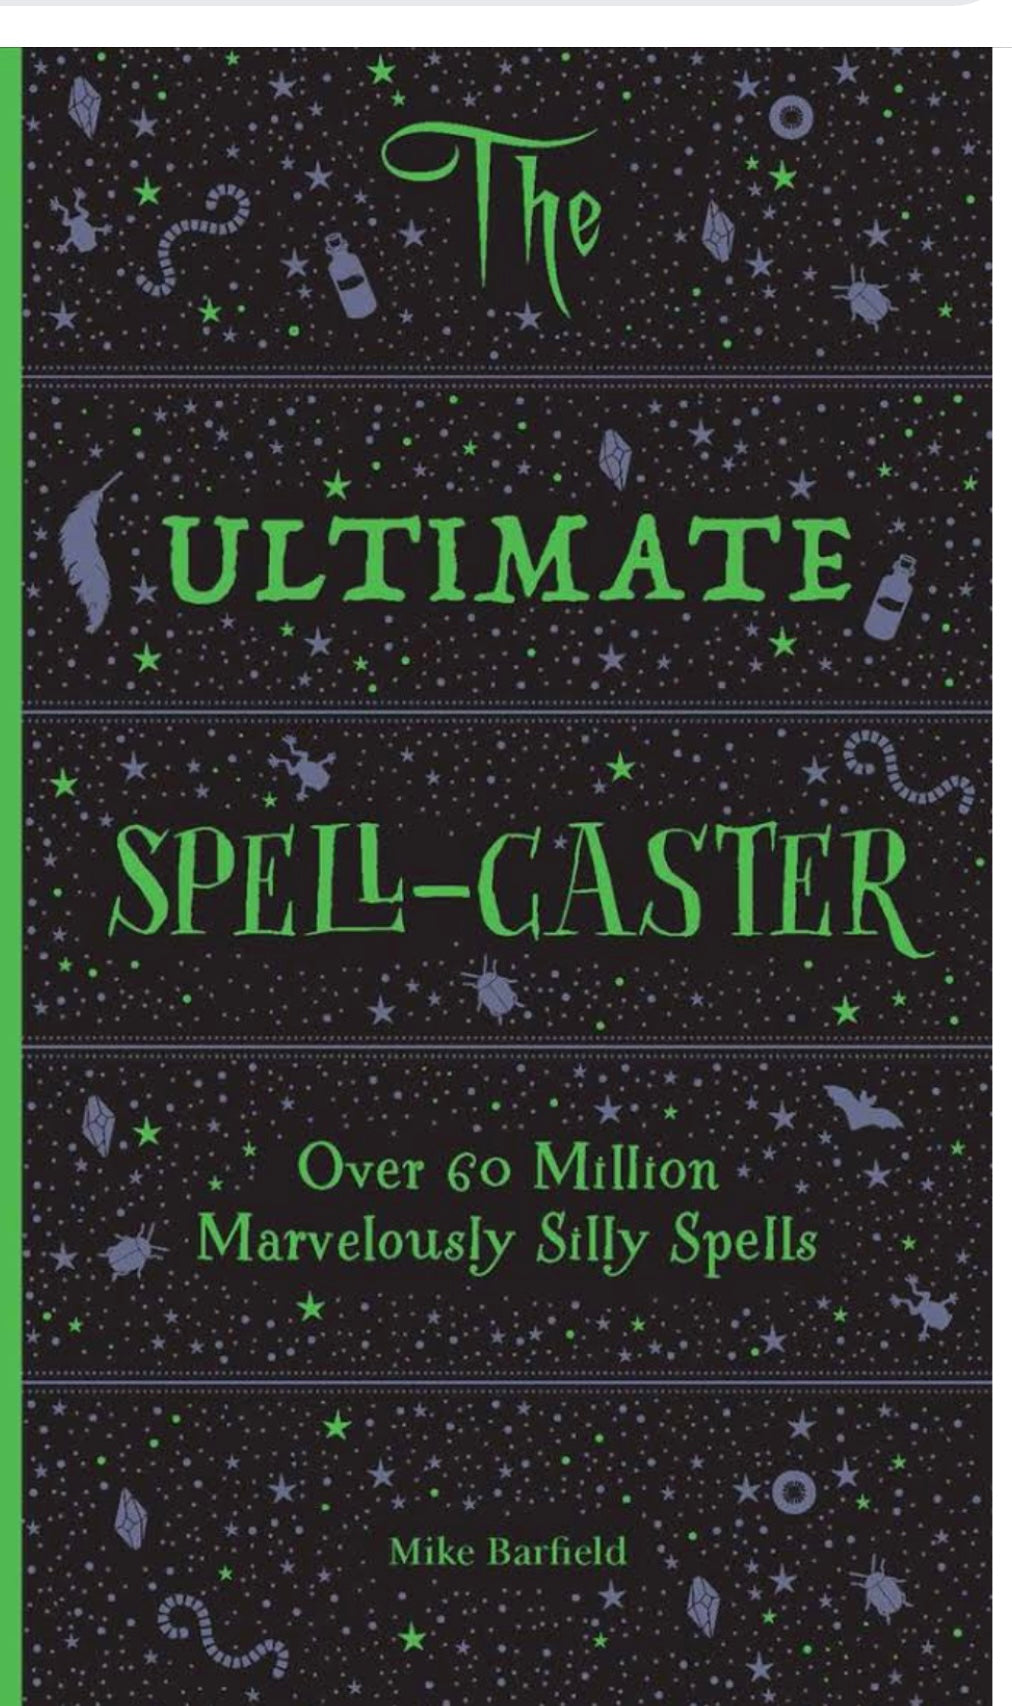 The Ultimate Spell-Caster Book - Einstein's Attic